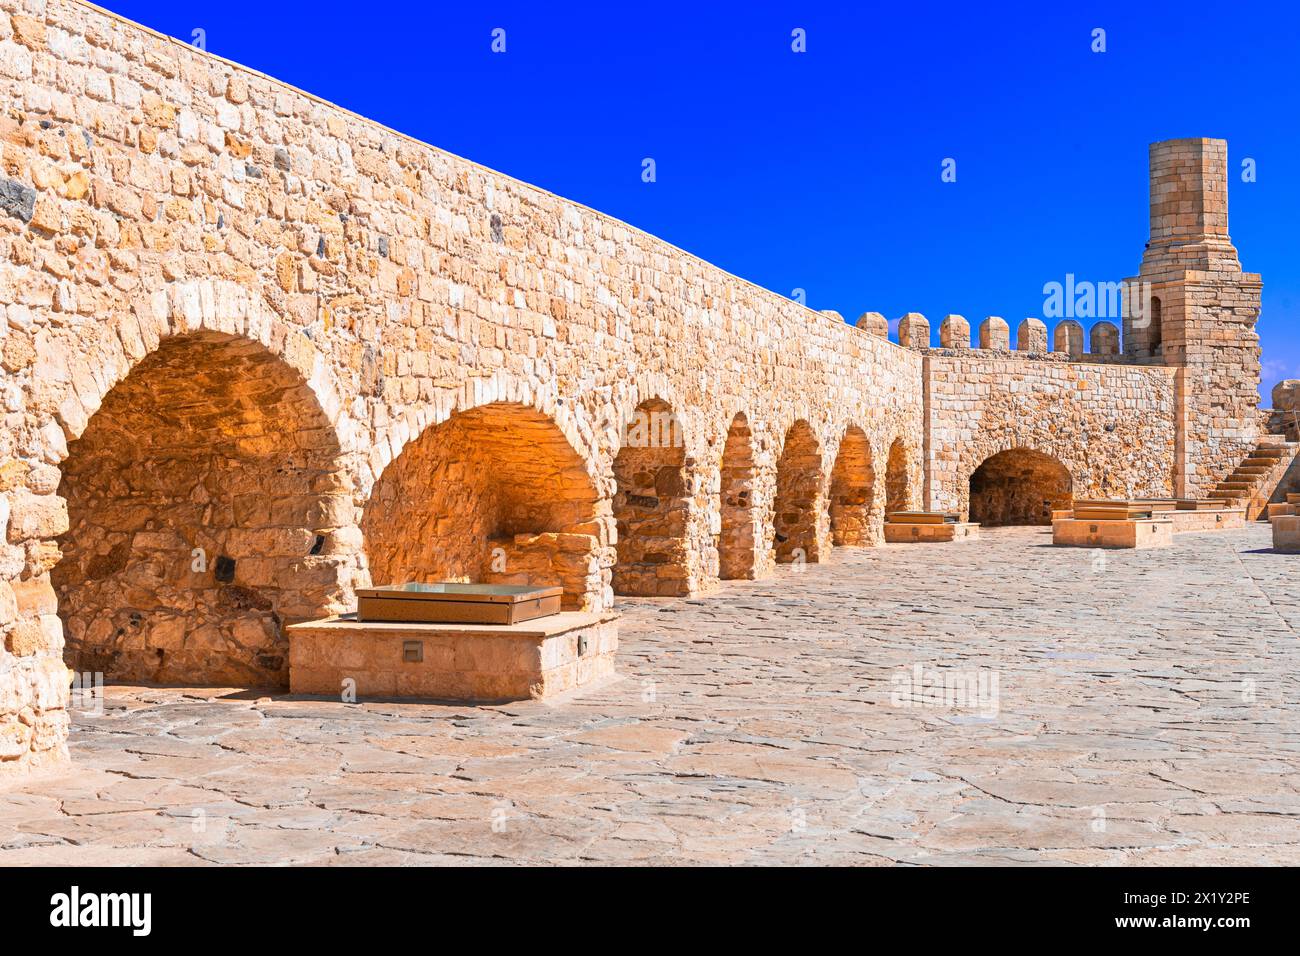 The Koules, Heraklion, Crete island, Greece: Fortified wall of The Koules or Castello a Mare, a fortress in the old port of Heraklion Stock Photo